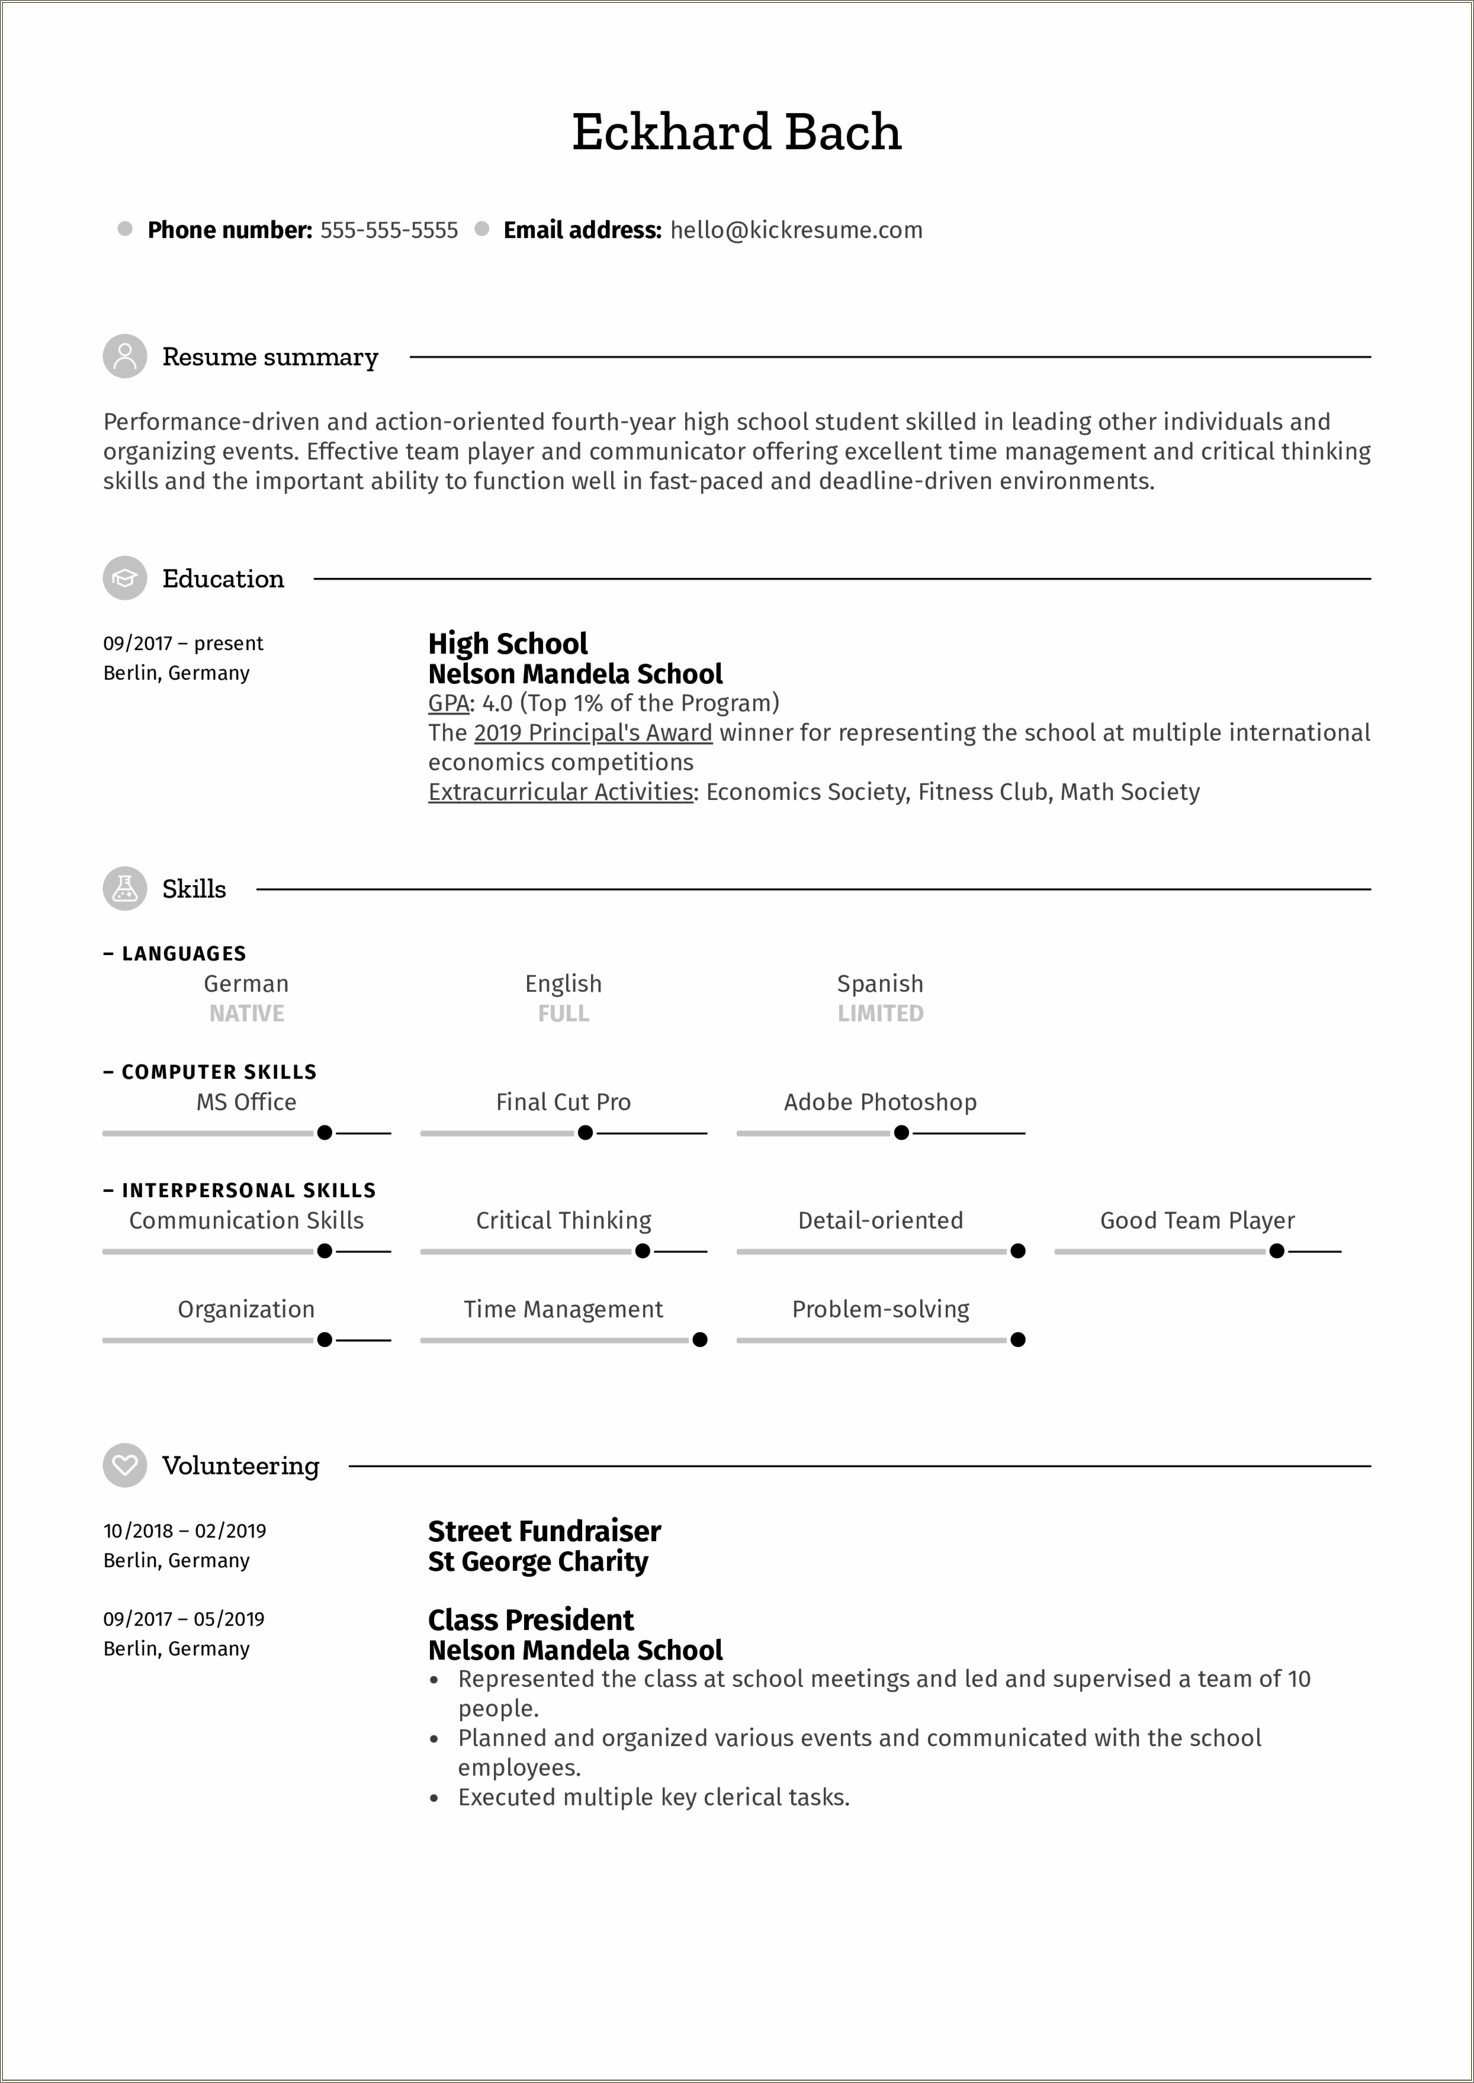 Resume Skills And Abilities For First Job